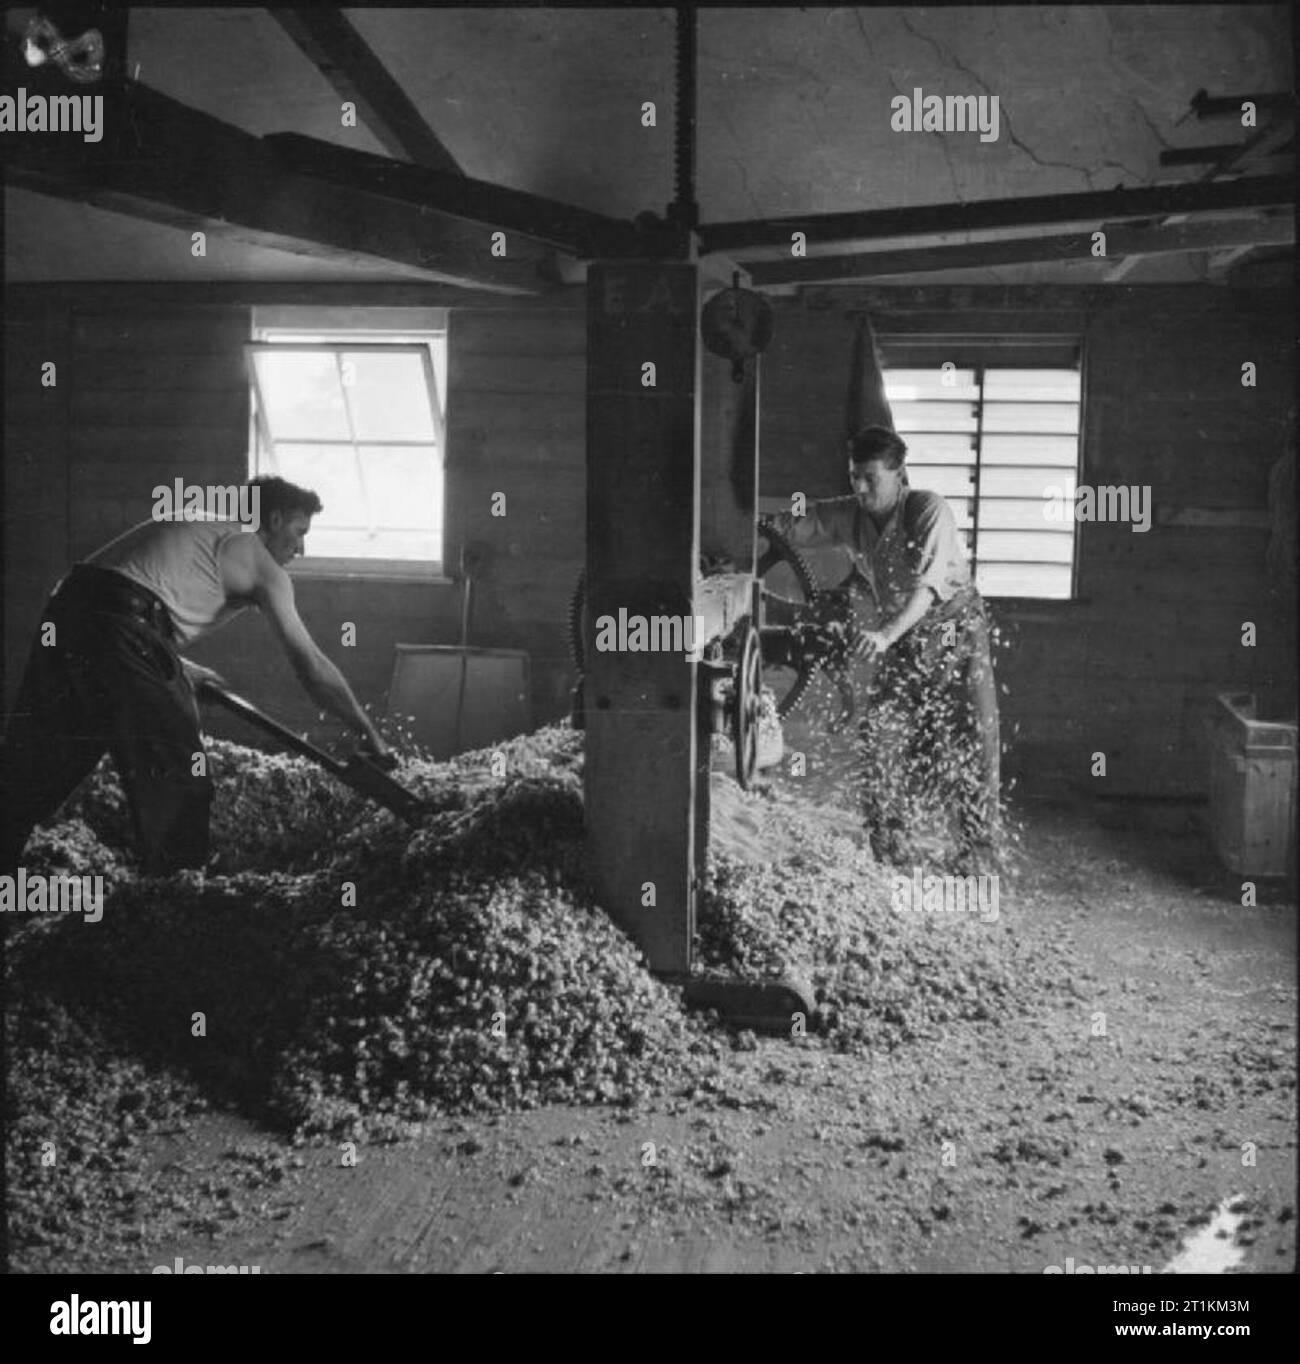 Hopping in Kent- Hop-picking in Yalding, Kent, England, UK, 1944 Two men work to compress dried hops on the press in the oast house on a hop farm in Yalding, Kent. The original caption explains the process: 'sometimes coal heated furnaces are used, the hot air from the being conveyed to the top storey of the oast house by suction fans, to blow on the hops laid out in horse hair cloths'. The hops are then compressed into sacks or 'pockets', which contain 140-150 bushels and weigh 1 and a half cwts. The pockets are then sent off to the brewer. Stock Photo